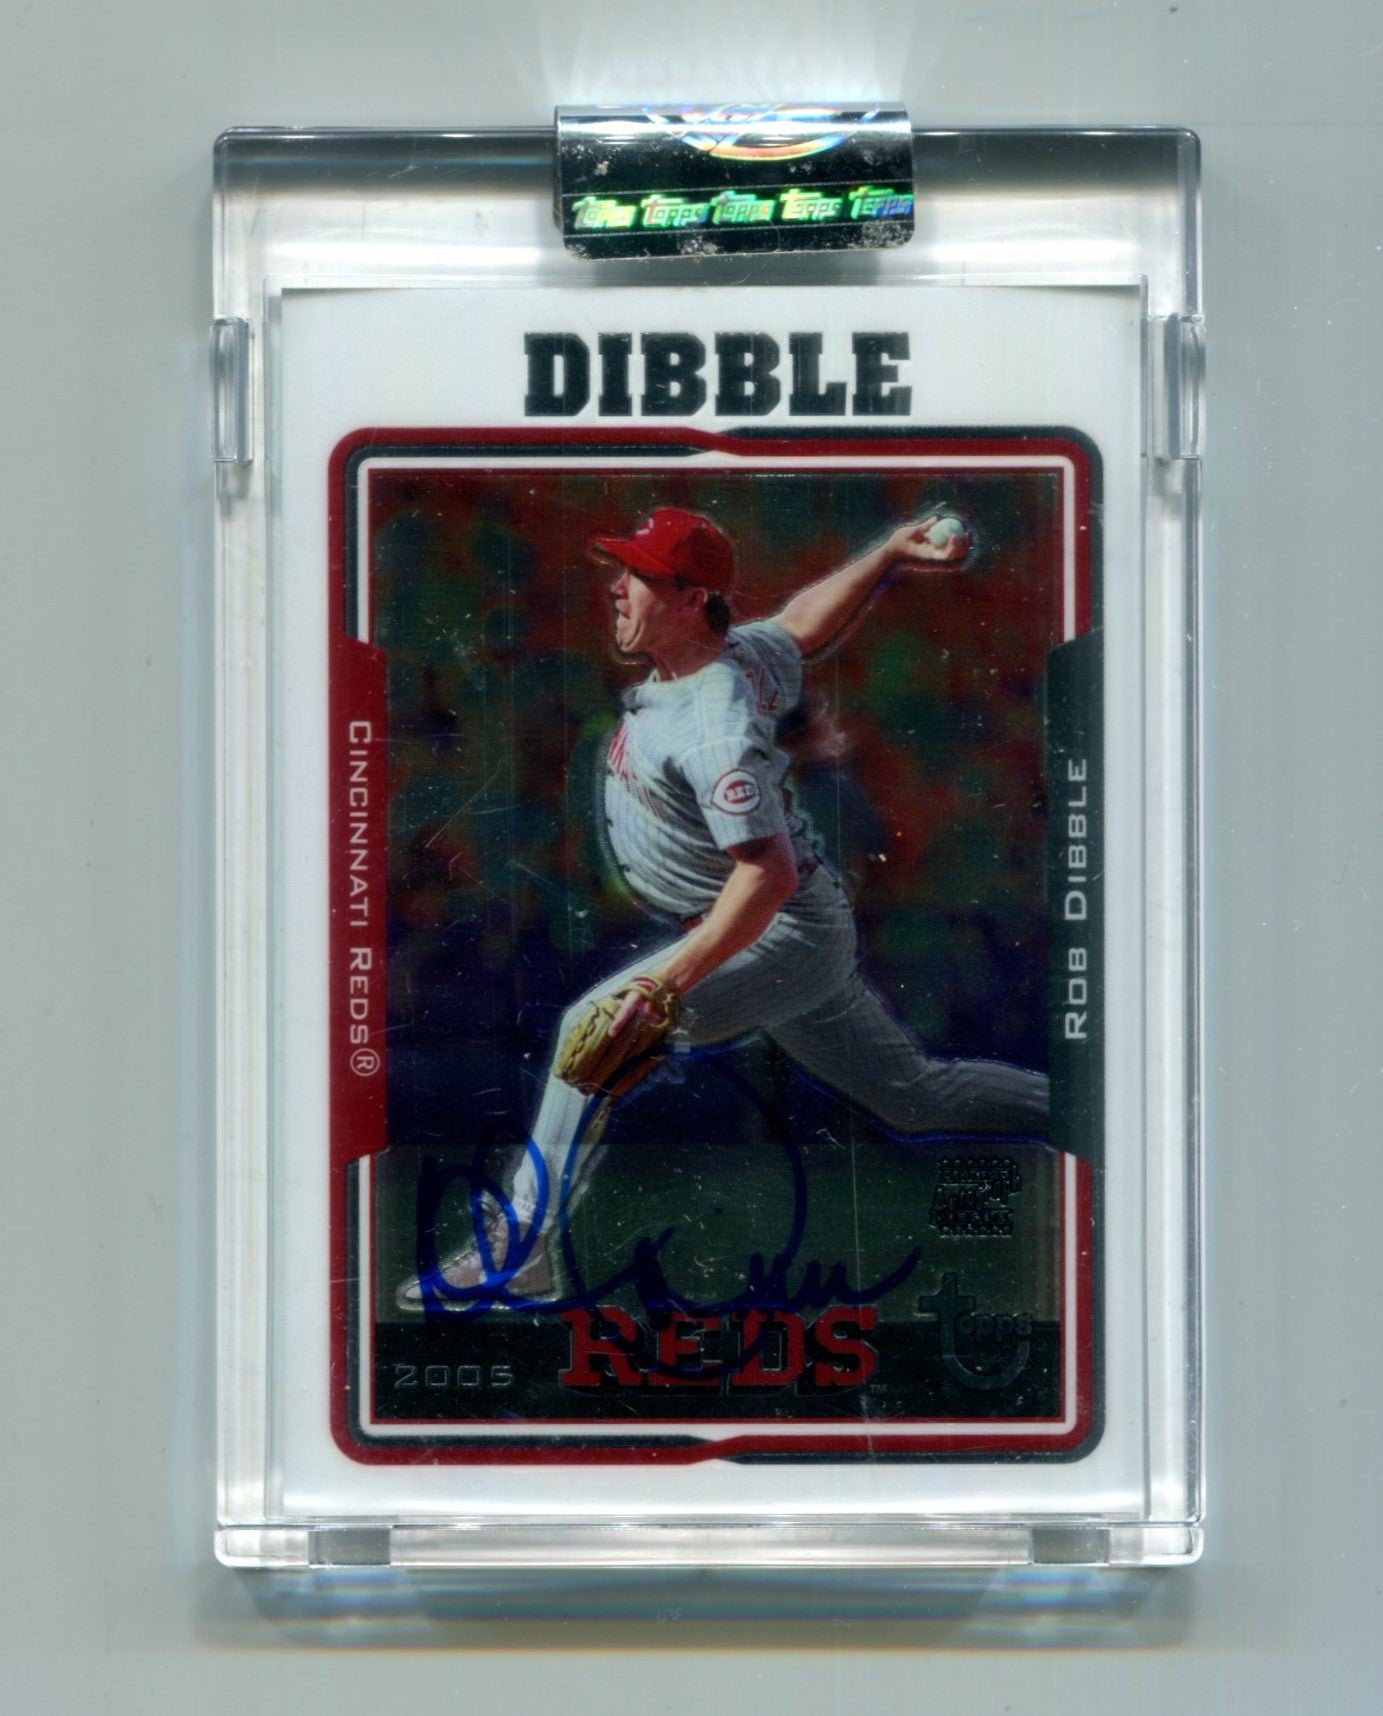 Rob Dibble 2005 Topps Autographed #TA-RKD Card